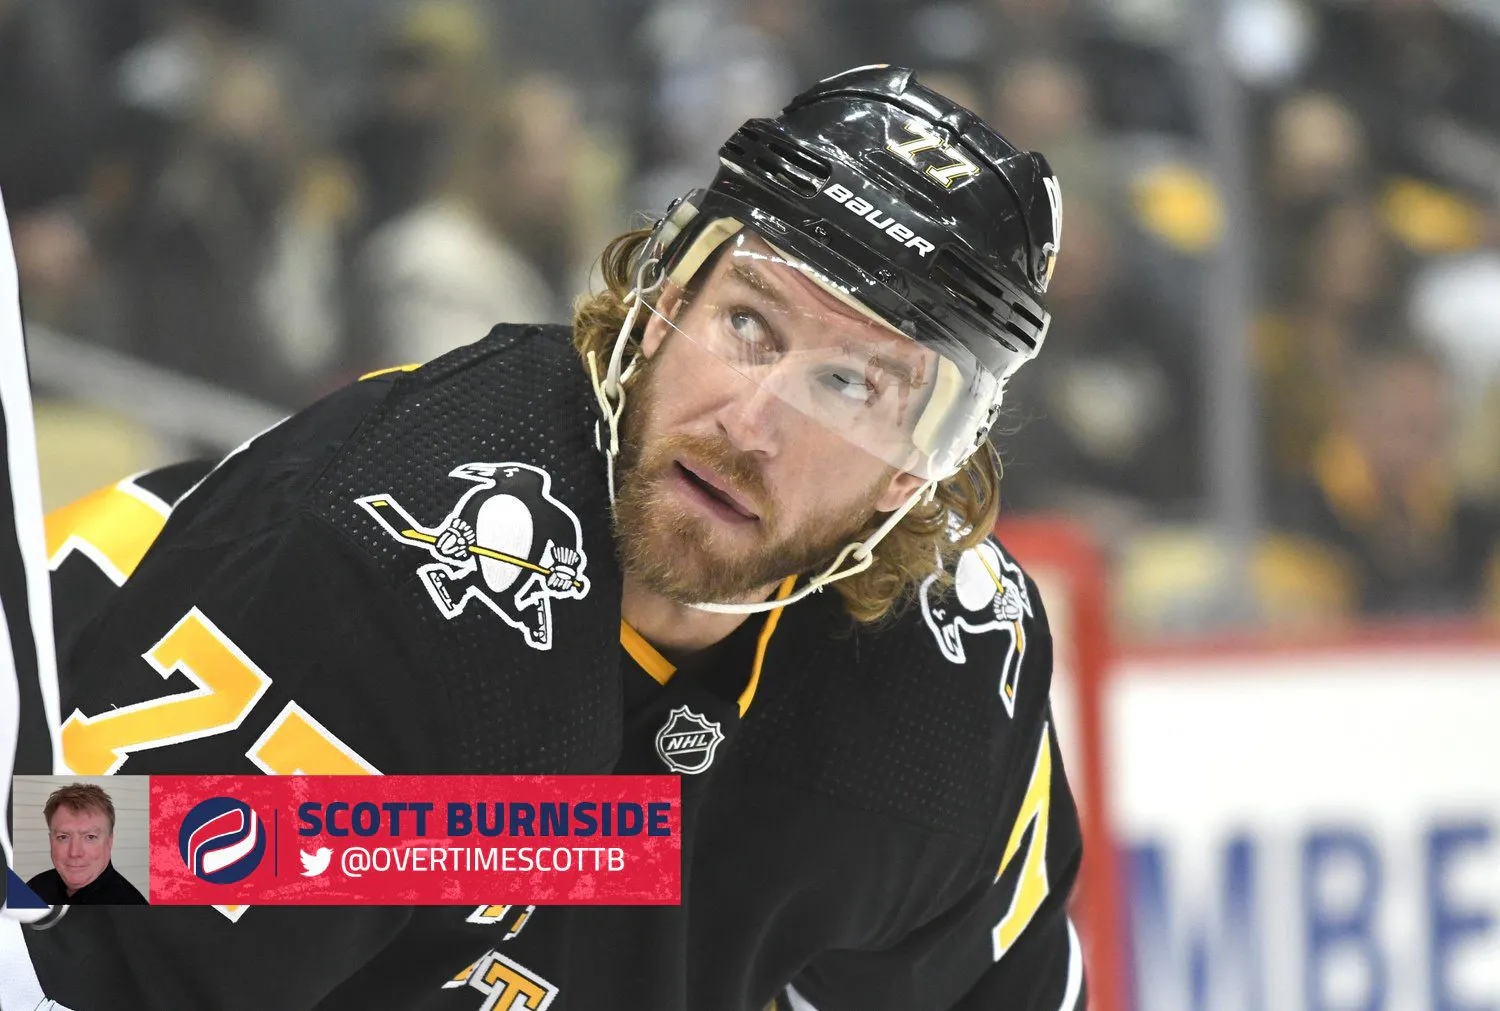 Burnside: Jeff Carter unexpectedly finds a new hockey home in Pittsburgh